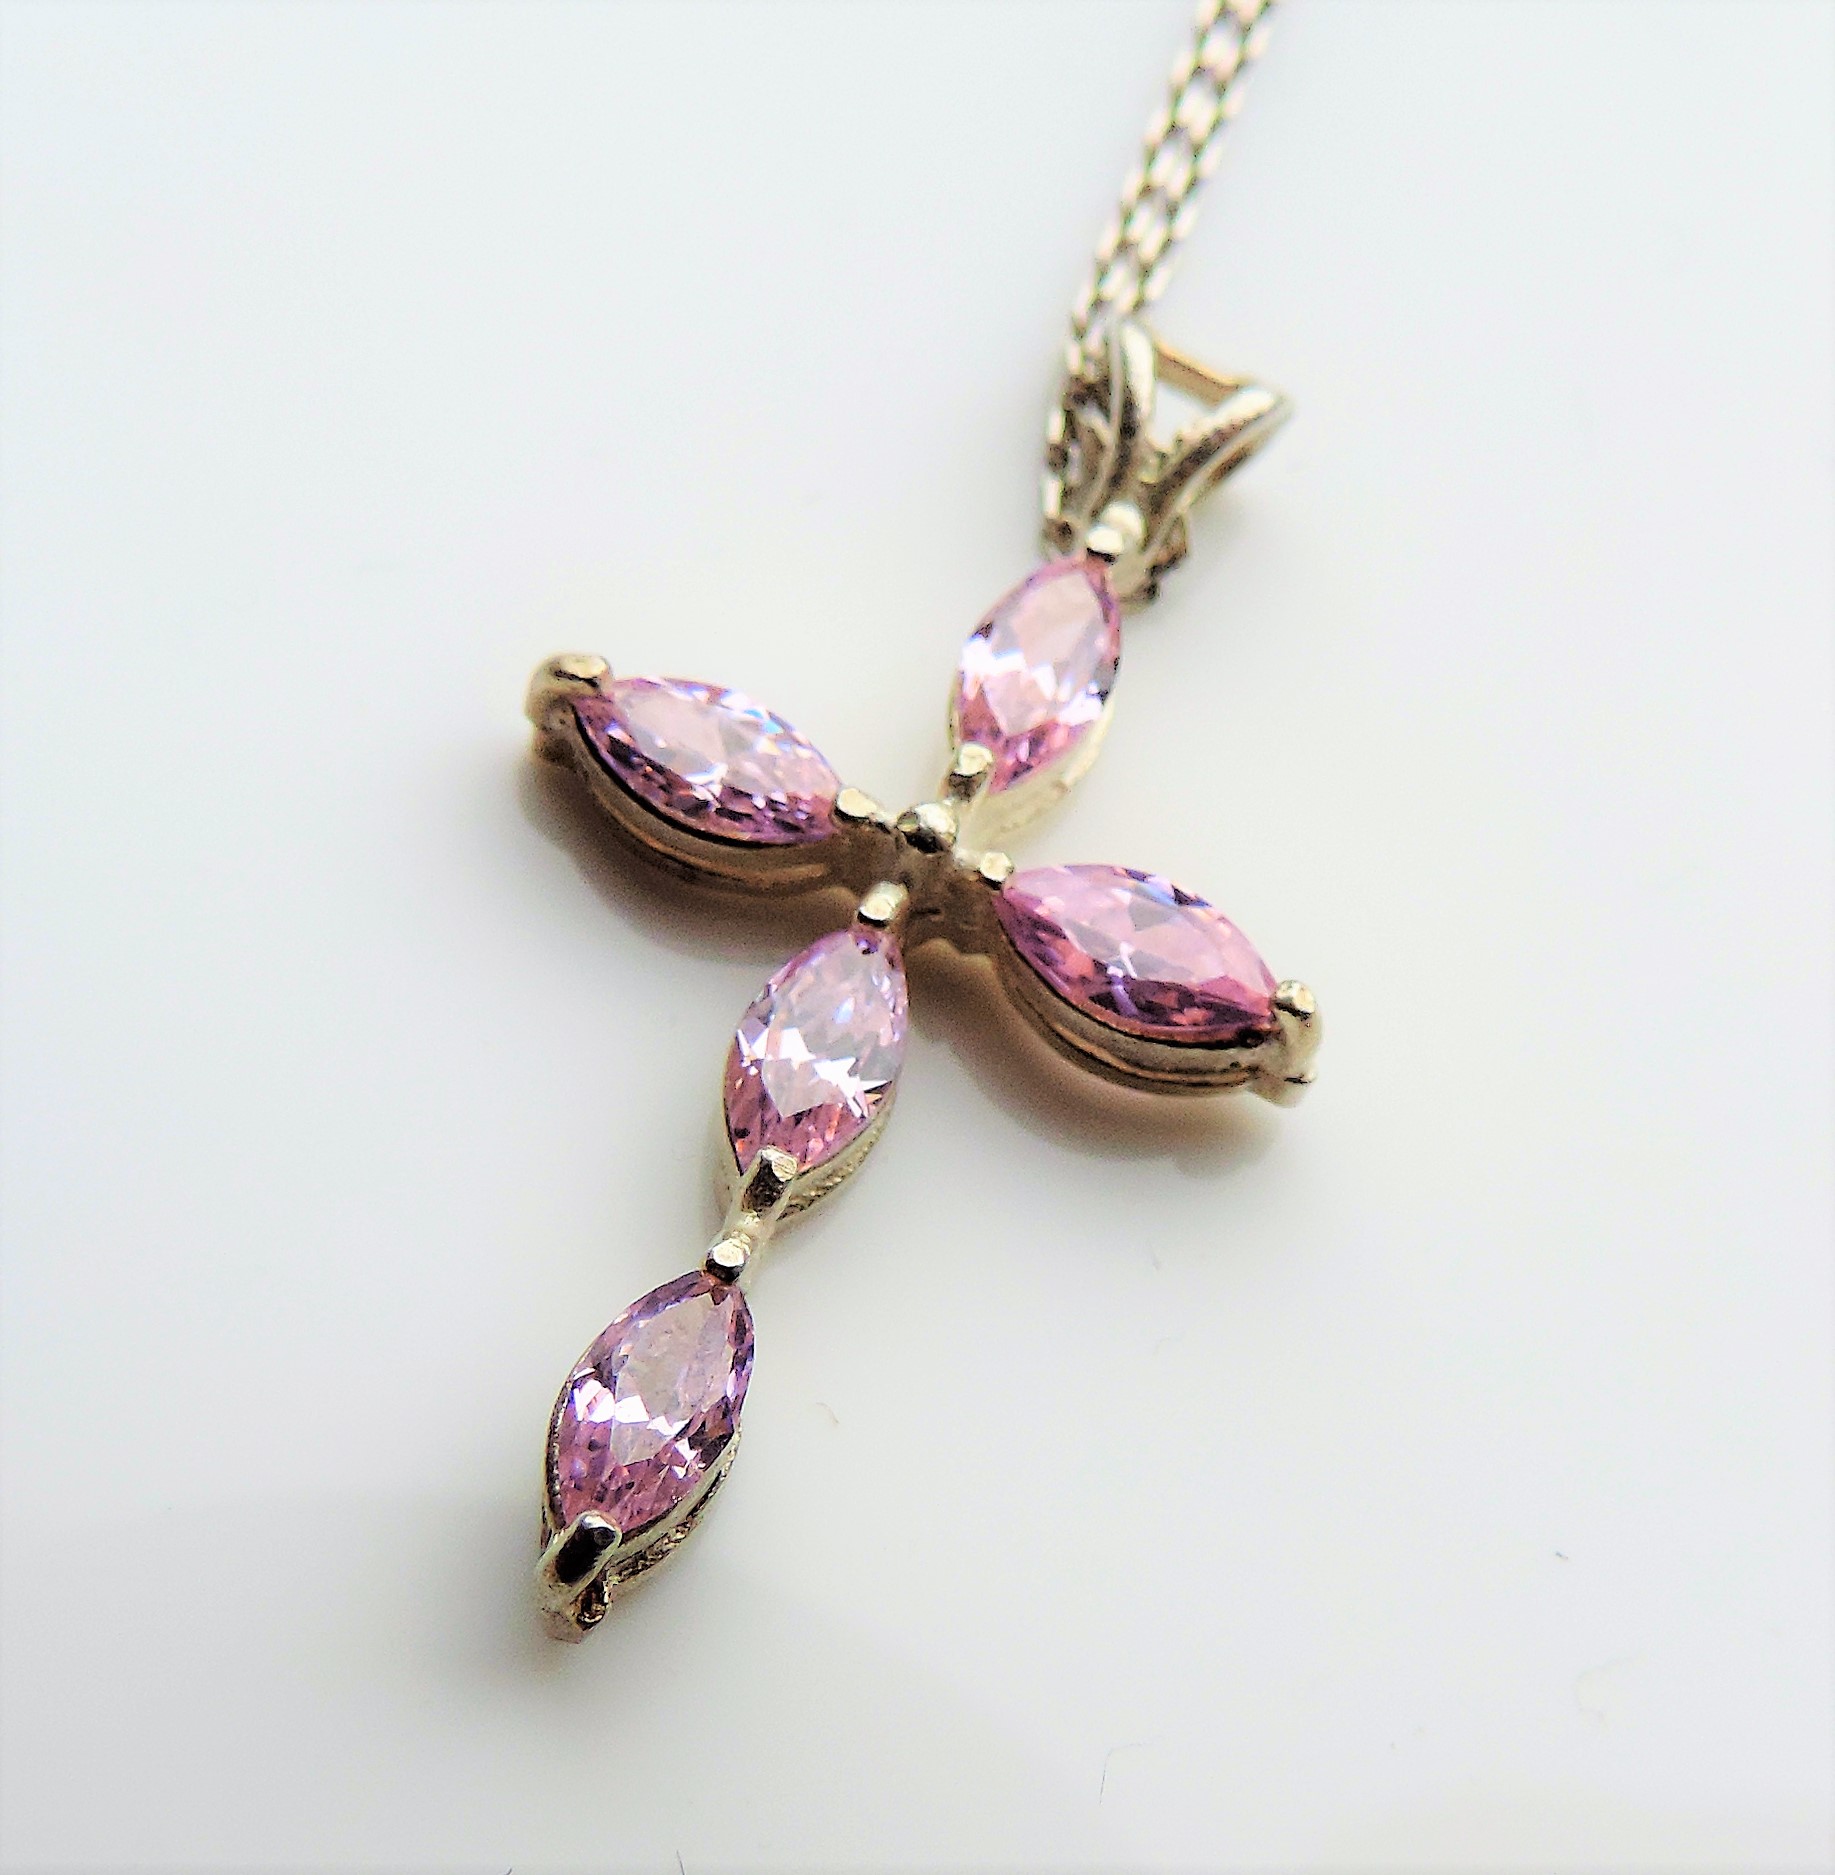 Sterling Silver Pink Topaz Pendant Cross Necklace - Image 2 of 3